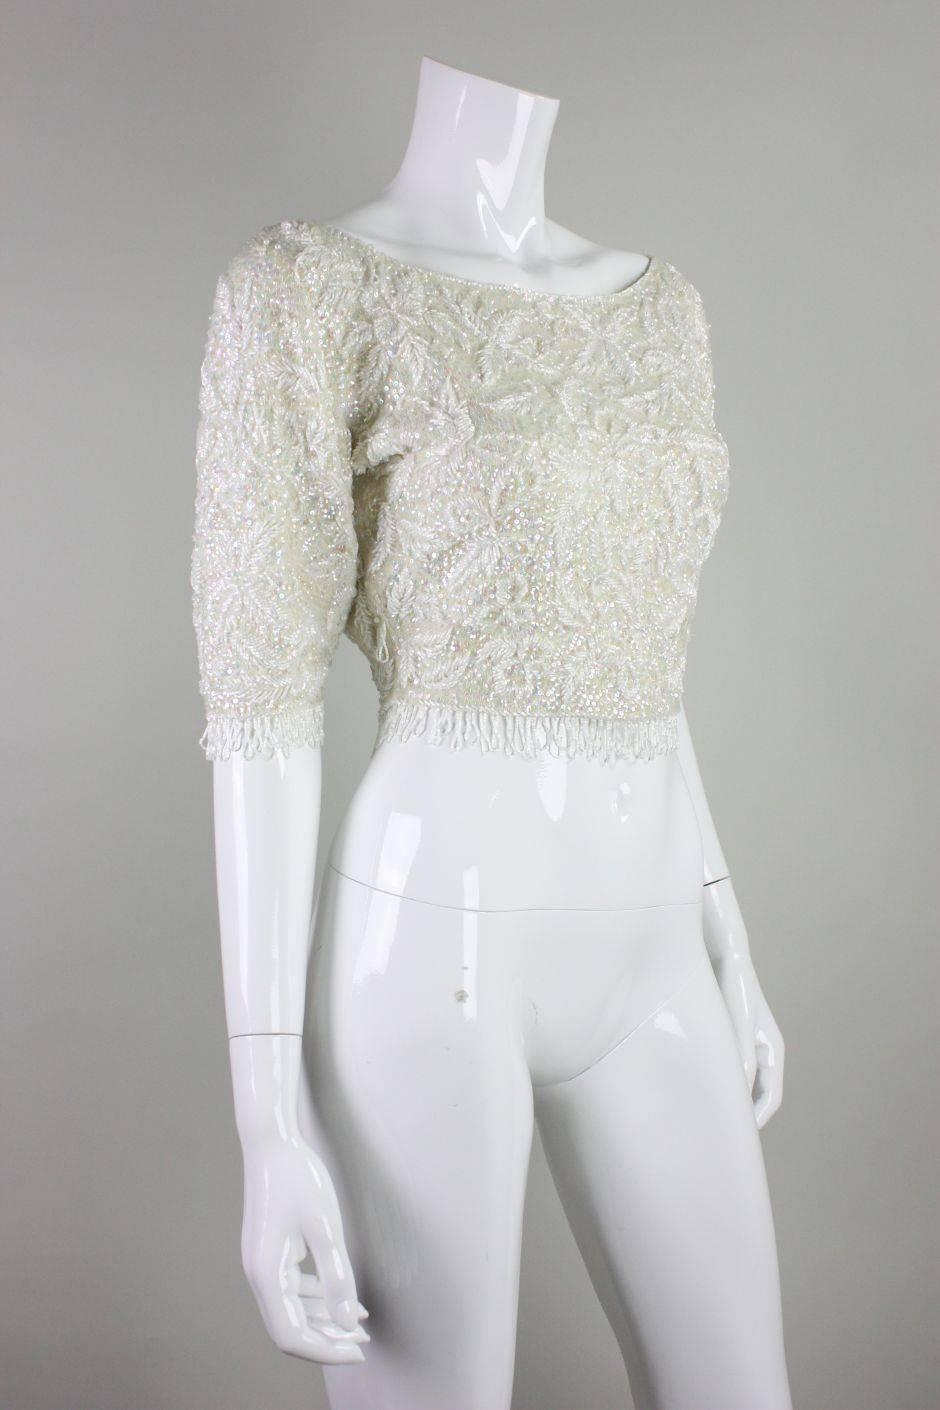 Vintage cropped sweater from Jo-Ro Imports retailed at I. Magnin and is made of cream-colored wool.  Sequins are iridescent and are accented with white bugle beads that are worked in a floral pattern.  Beaded looped fringe trims the cuffs and